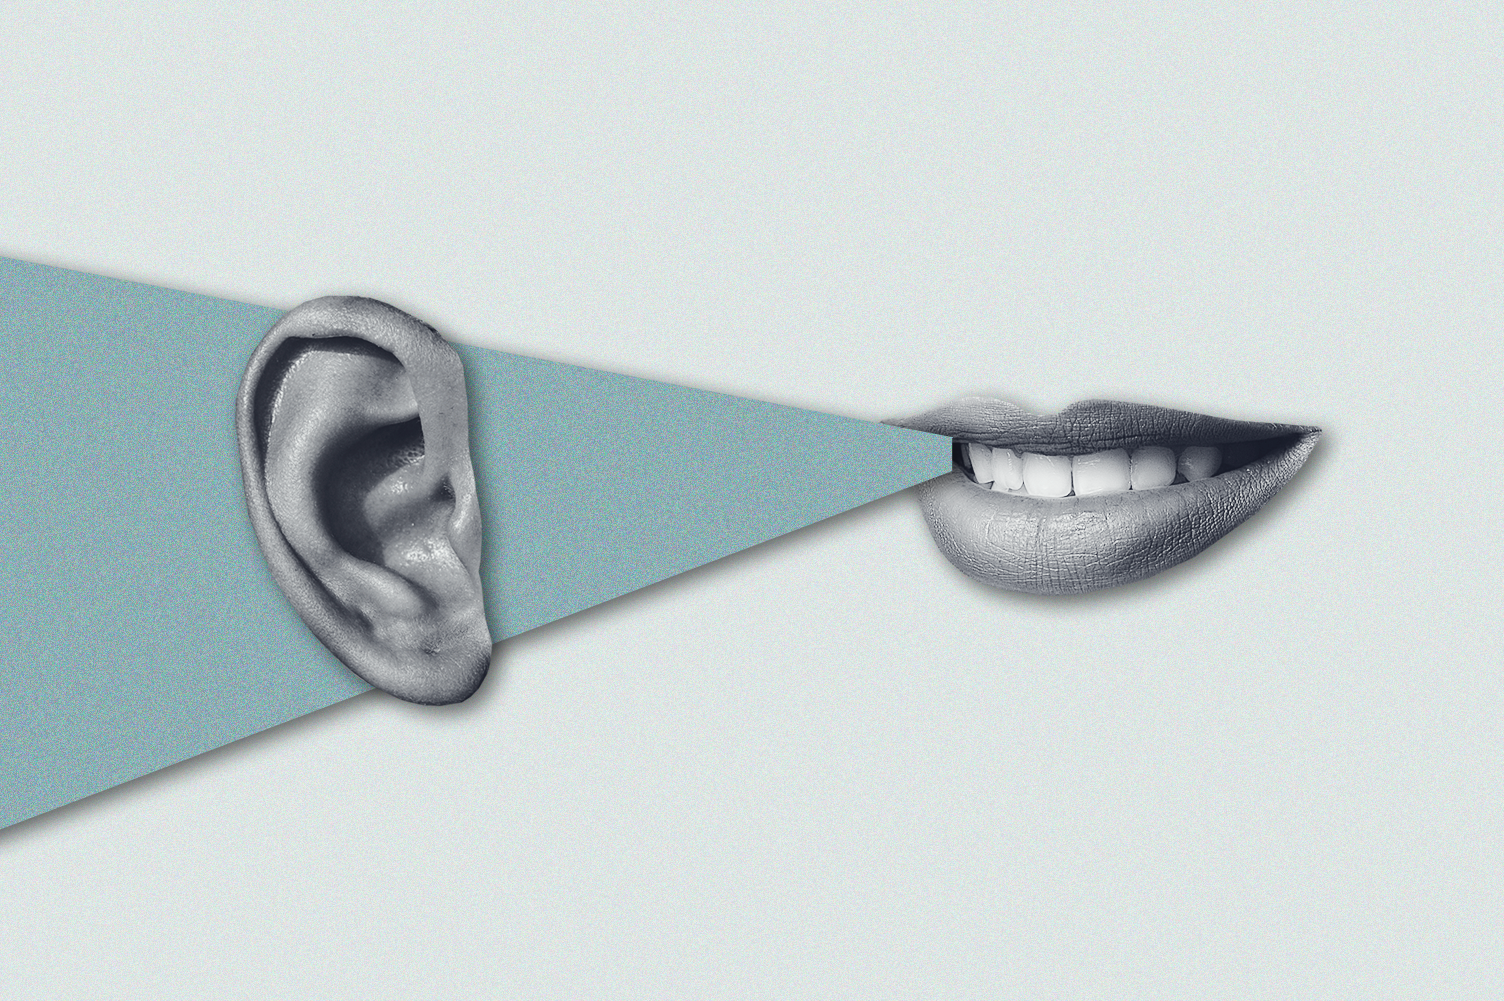  A triangle connects a woman's mouth to another person's ear to show word-of-mouth and symbolize eNPS